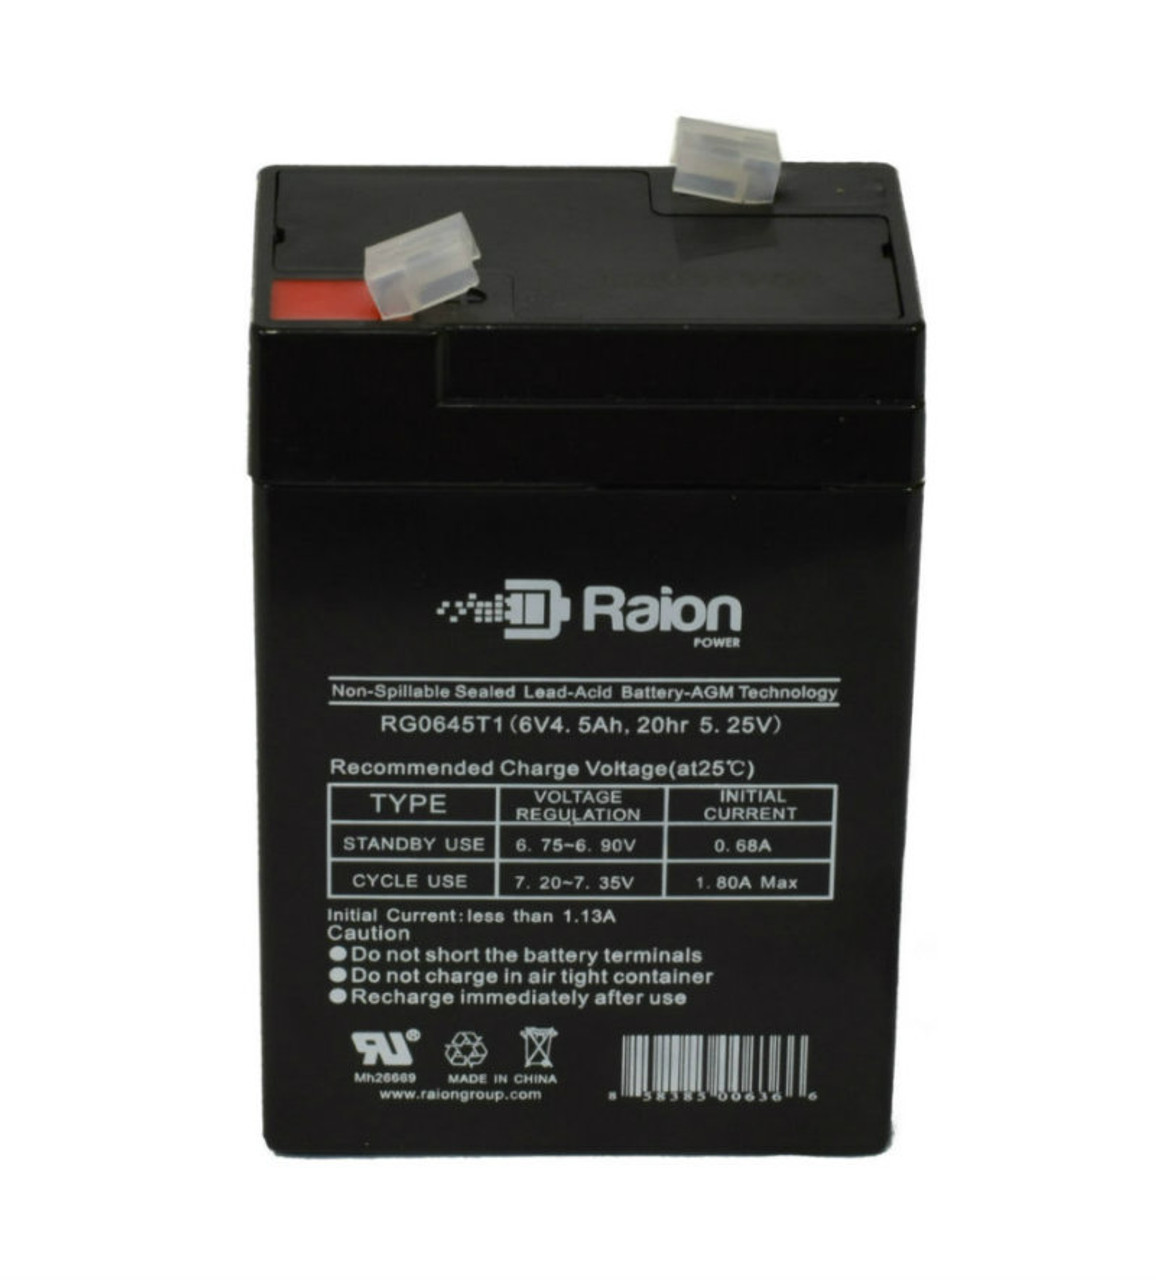 Raion Power RG0645T1 Replacement Battery Cartridge for Weiboer GB6-4.5